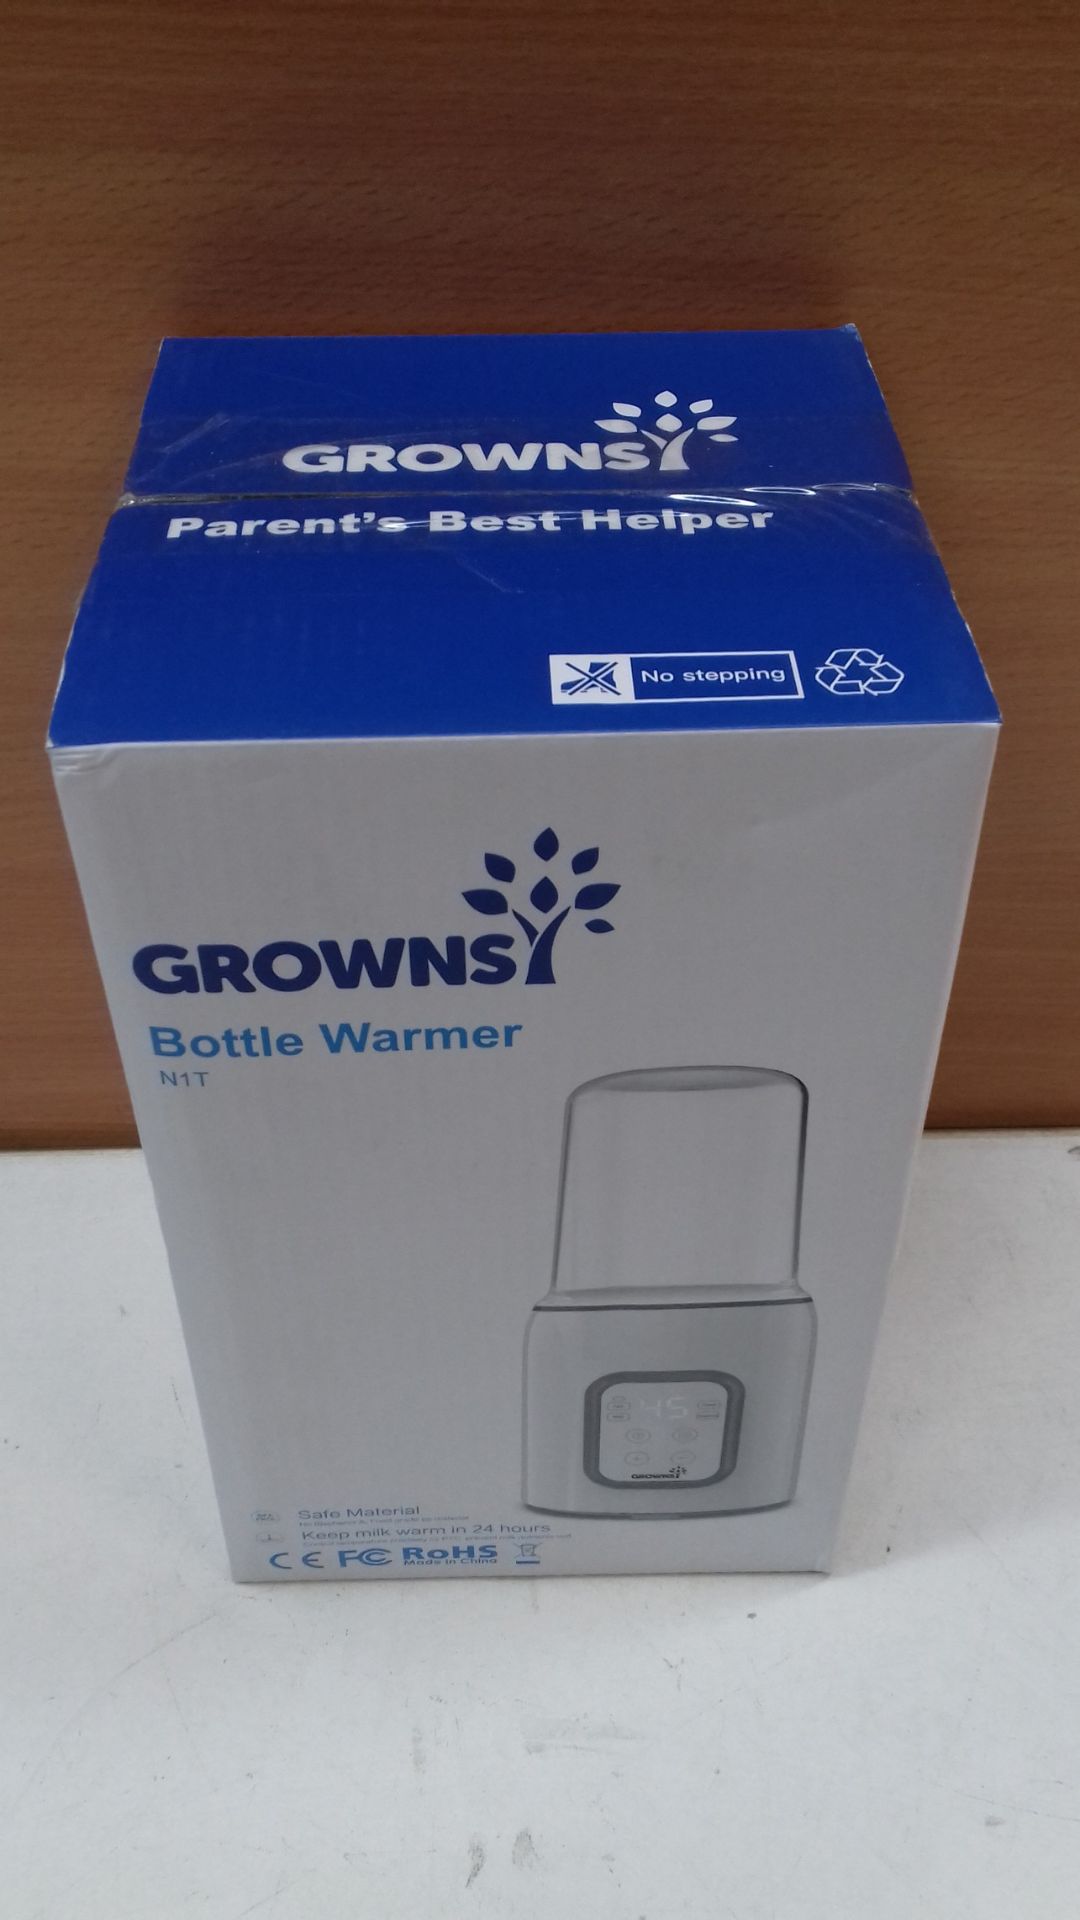 RRP £34.99 Bottle Warmer 5-in-1 Fast Baby Bottle Warmer and Steriliser with Timer - Image 2 of 2